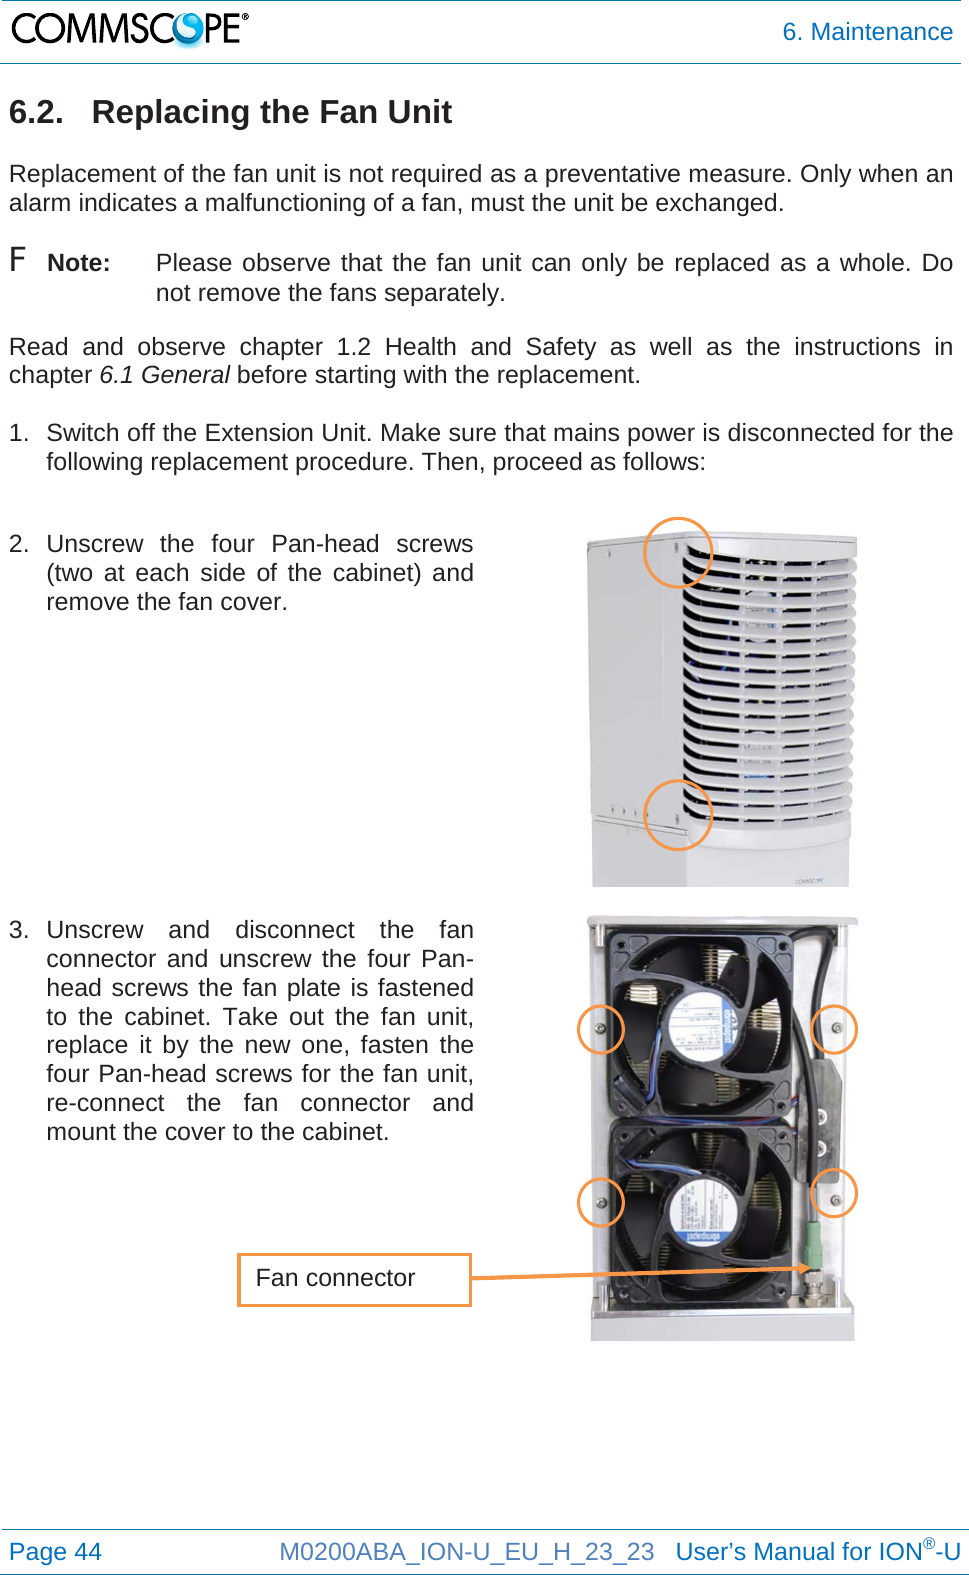  6. Maintenance  Page 44 M0200ABA_ION-U_EU_H_23_23   User’s Manual for ION®-U  6.2.   Replacing the Fan Unit  Replacement of the fan unit is not required as a preventative measure. Only when an alarm indicates a malfunctioning of a fan, must the unit be exchanged. F Note: Please observe that the fan unit can only be replaced as a whole. Do not remove the fans separately. Read  and observe chapter  1.2 Health and Safety as well as the instructions in chapter 6.1 General before starting with the replacement.   1. Switch off the Extension Unit. Make sure that mains power is disconnected for the following replacement procedure. Then, proceed as follows:  2.  Unscrew  the four Pan-head  screws (two at each side of the cabinet) and remove the fan cover.     3. Unscrew and disconnect the fan connector and unscrew the four Pan-head screws the fan plate is fastened to the cabinet. Take out the fan unit, replace it by the new one, fasten the four Pan-head screws for the fan unit, re-connect the fan connector and mount the cover to the cabinet.       Fan connector 